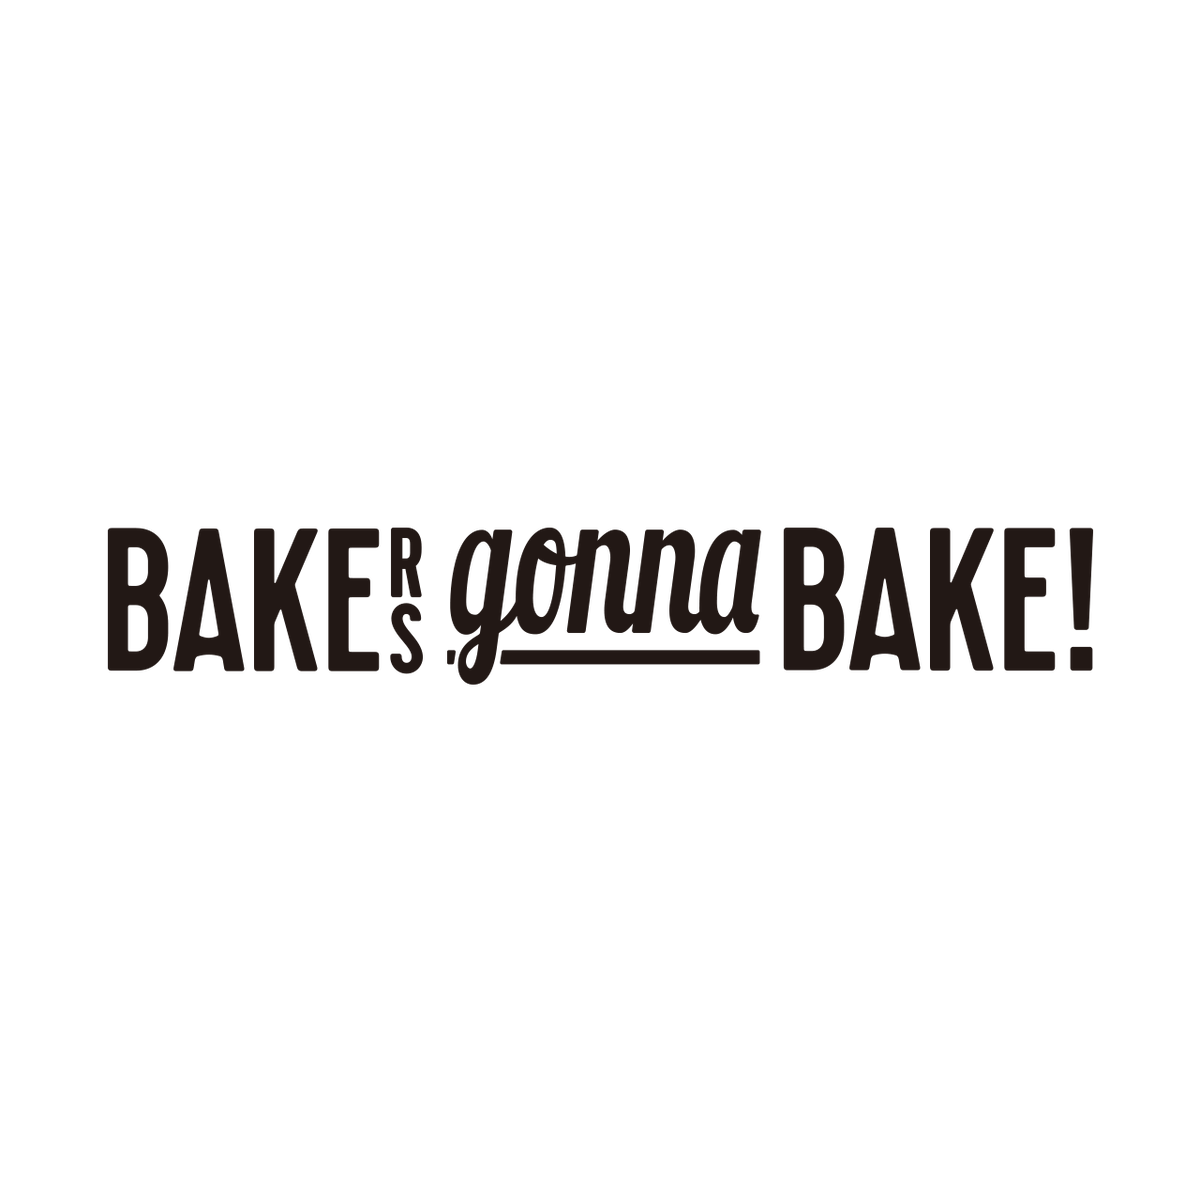 Bakers gonna Bake! powered by BASE